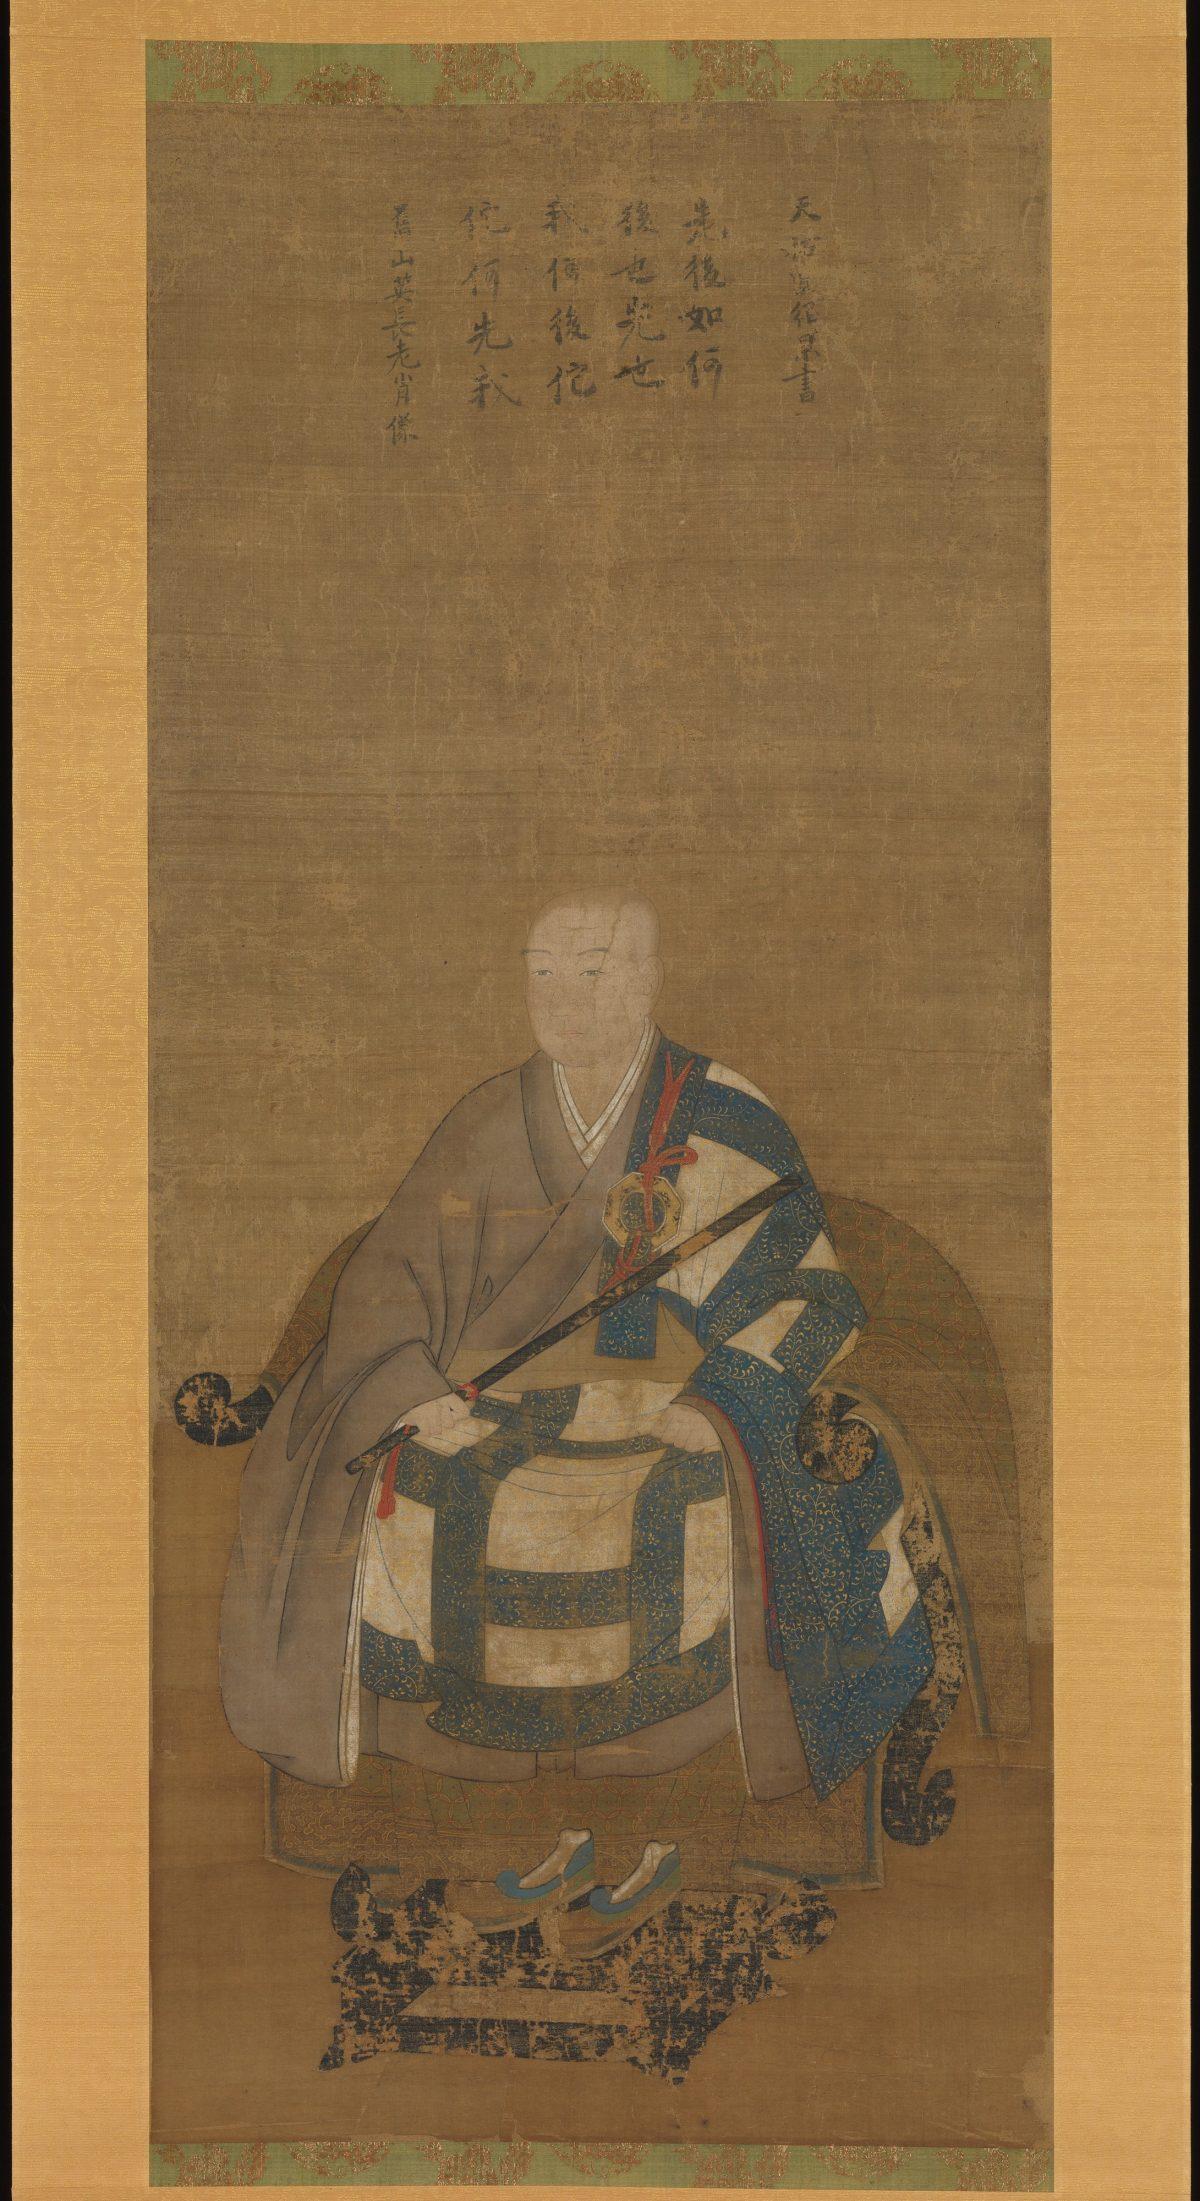 Portrait of Kyuzan Soei, Edo period (1615–1868), 17th century. The “chinso,” or portrait of a Zen master, is the epitome of Zen culture. It is given by a master to a disciple as certification of the latter's attaining enlightenment. Rogers Fund, 1913. (The Metropolitan Museum of Art)